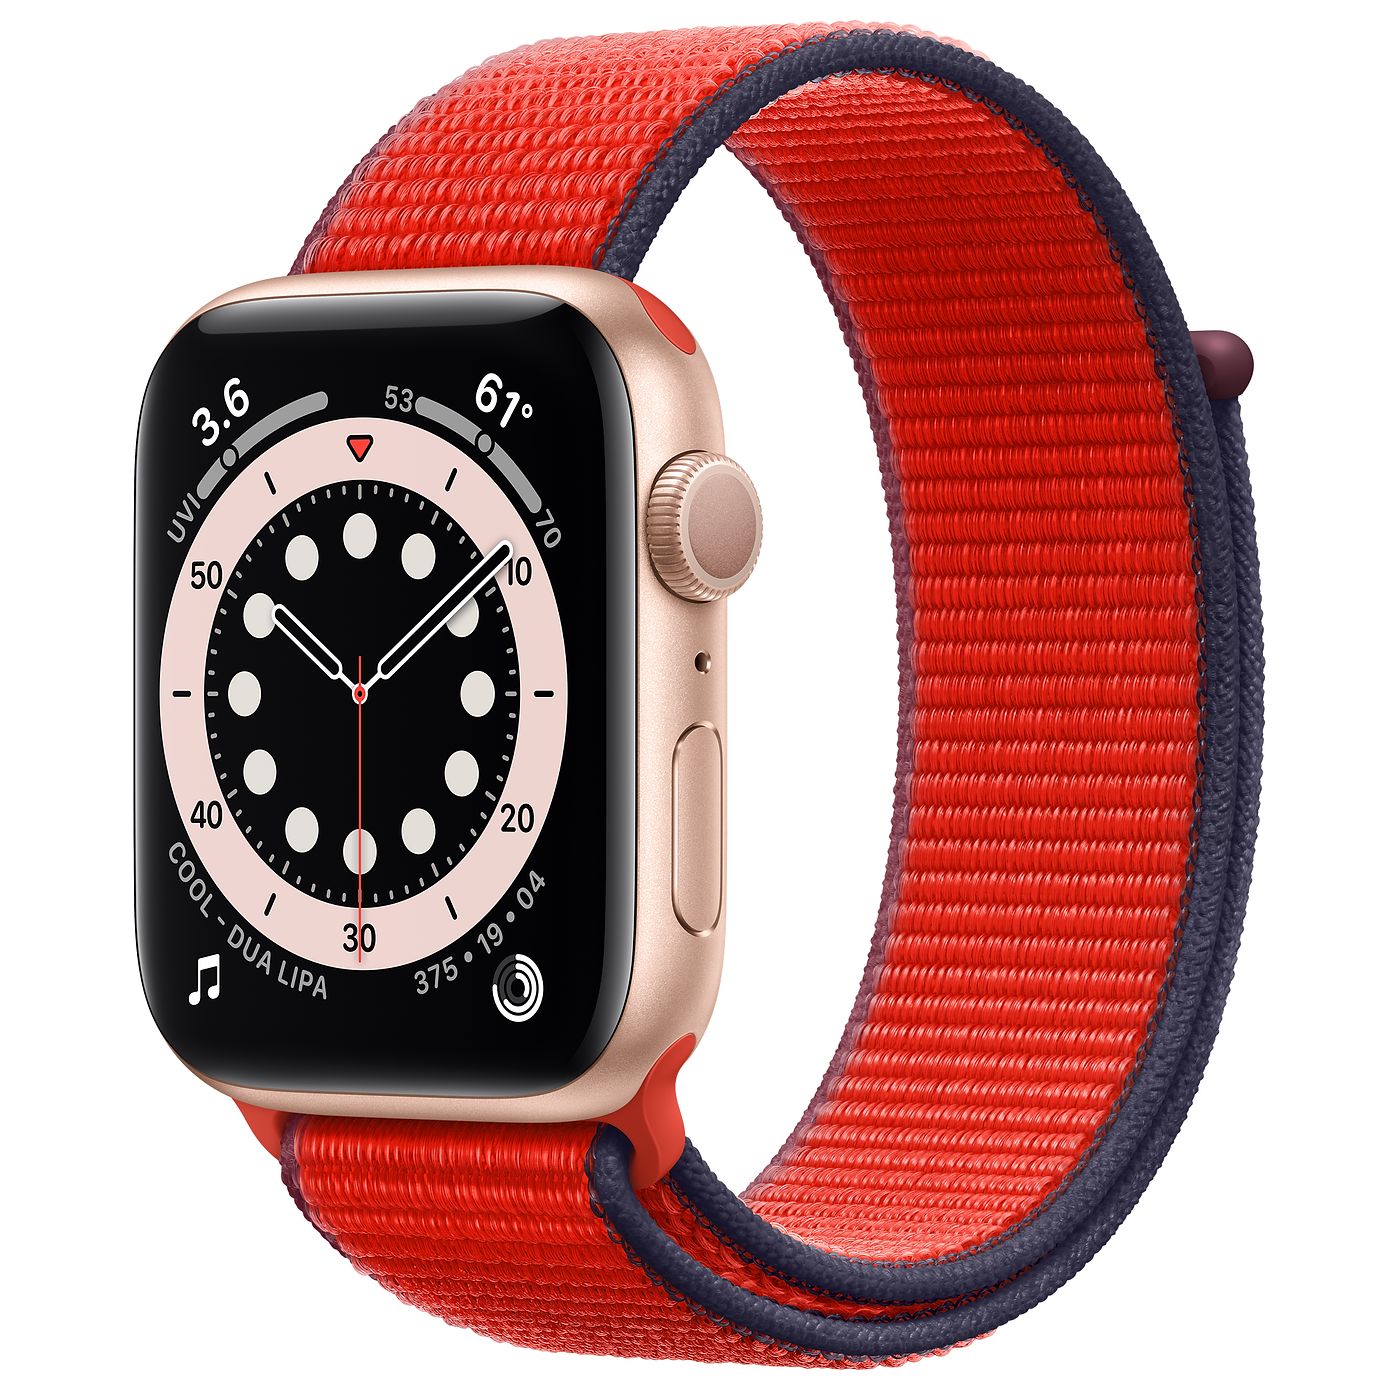 Apple Watch Series 6 GPS 44mm Gold Aluminum with Red Sport Loop